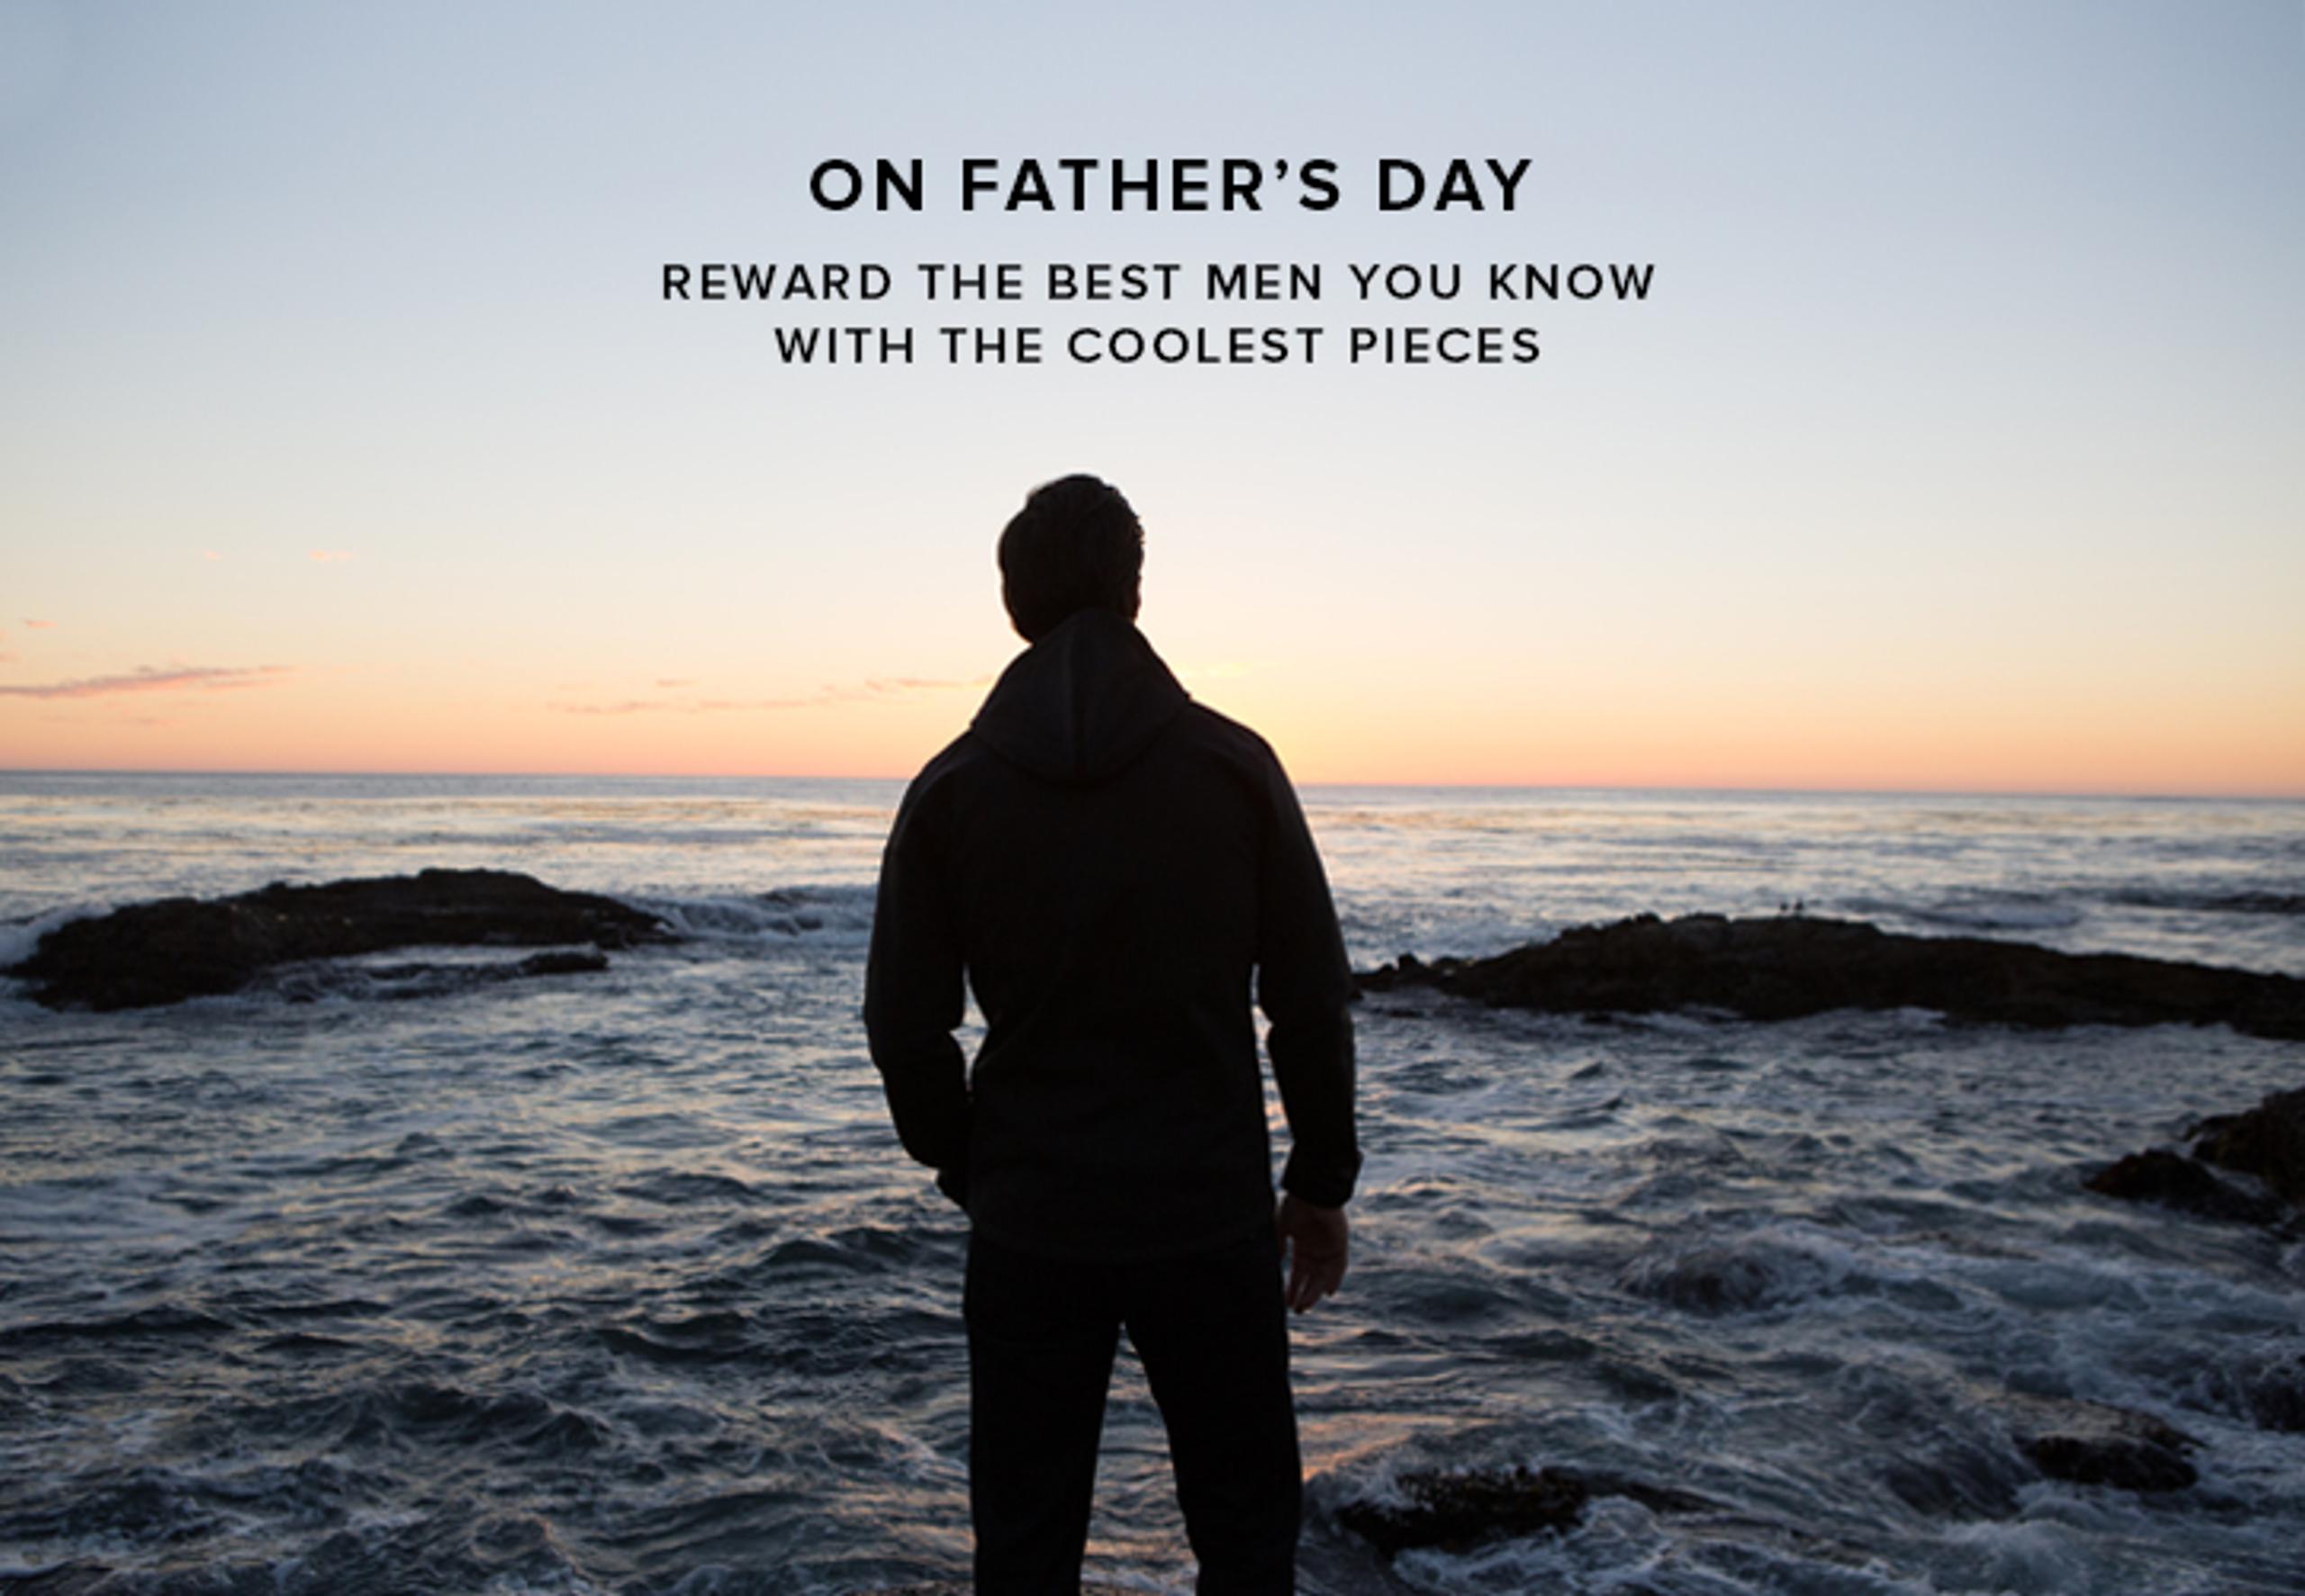 graphic reading "on father's day reward the best men you know with the coolest pieces"